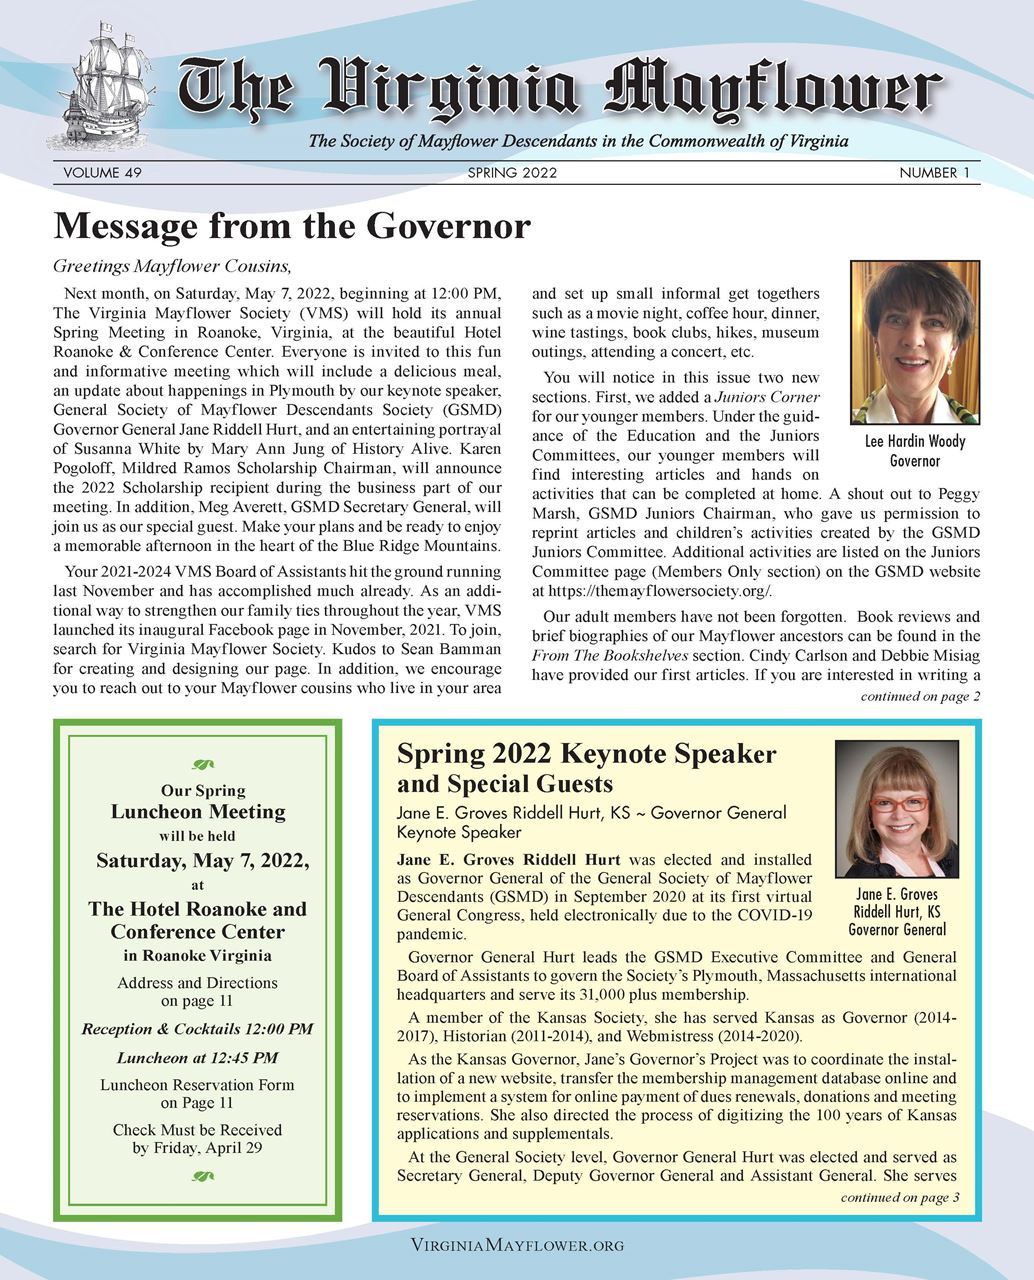 Cover image of Spring 2022 newsletter